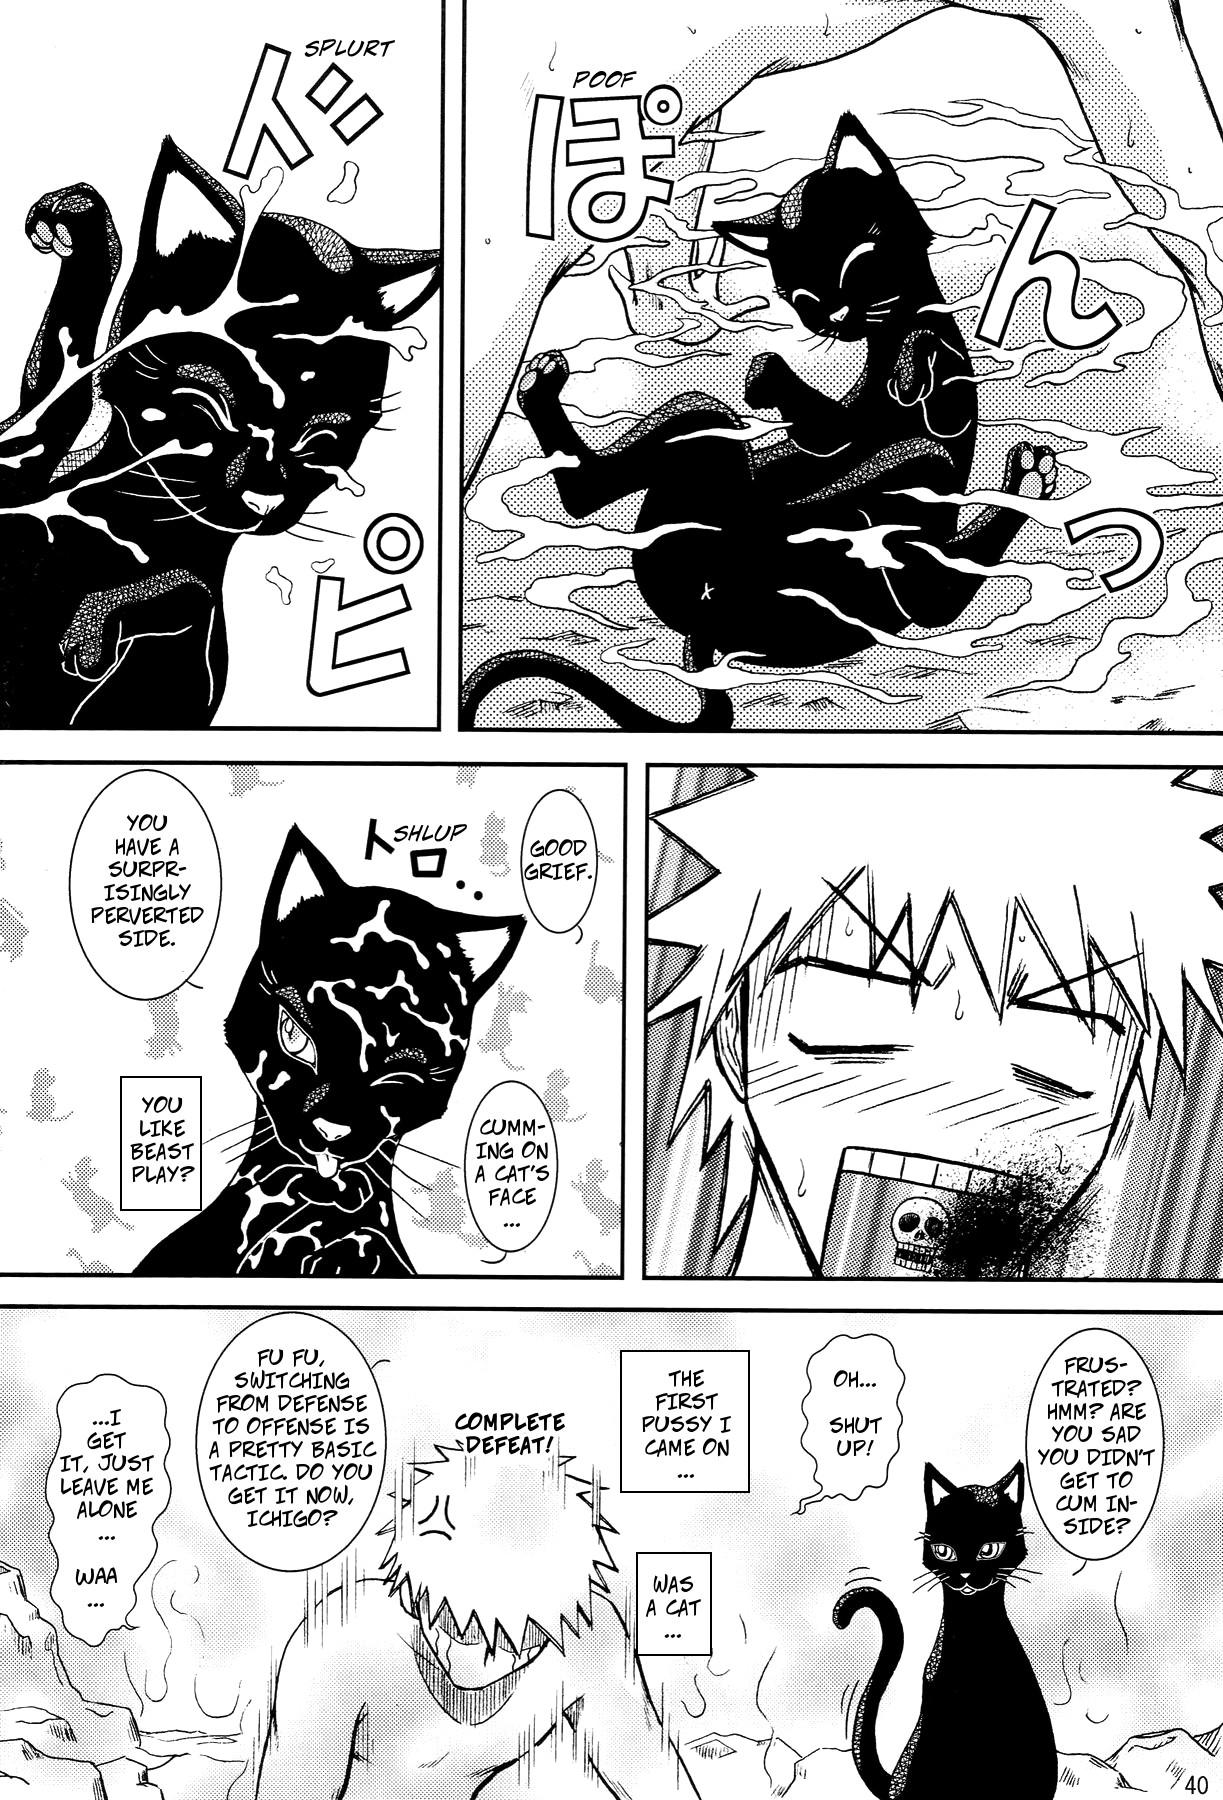 Argenta Black Magic Woman - Bleach Tight Pussy Fuck - Page 11